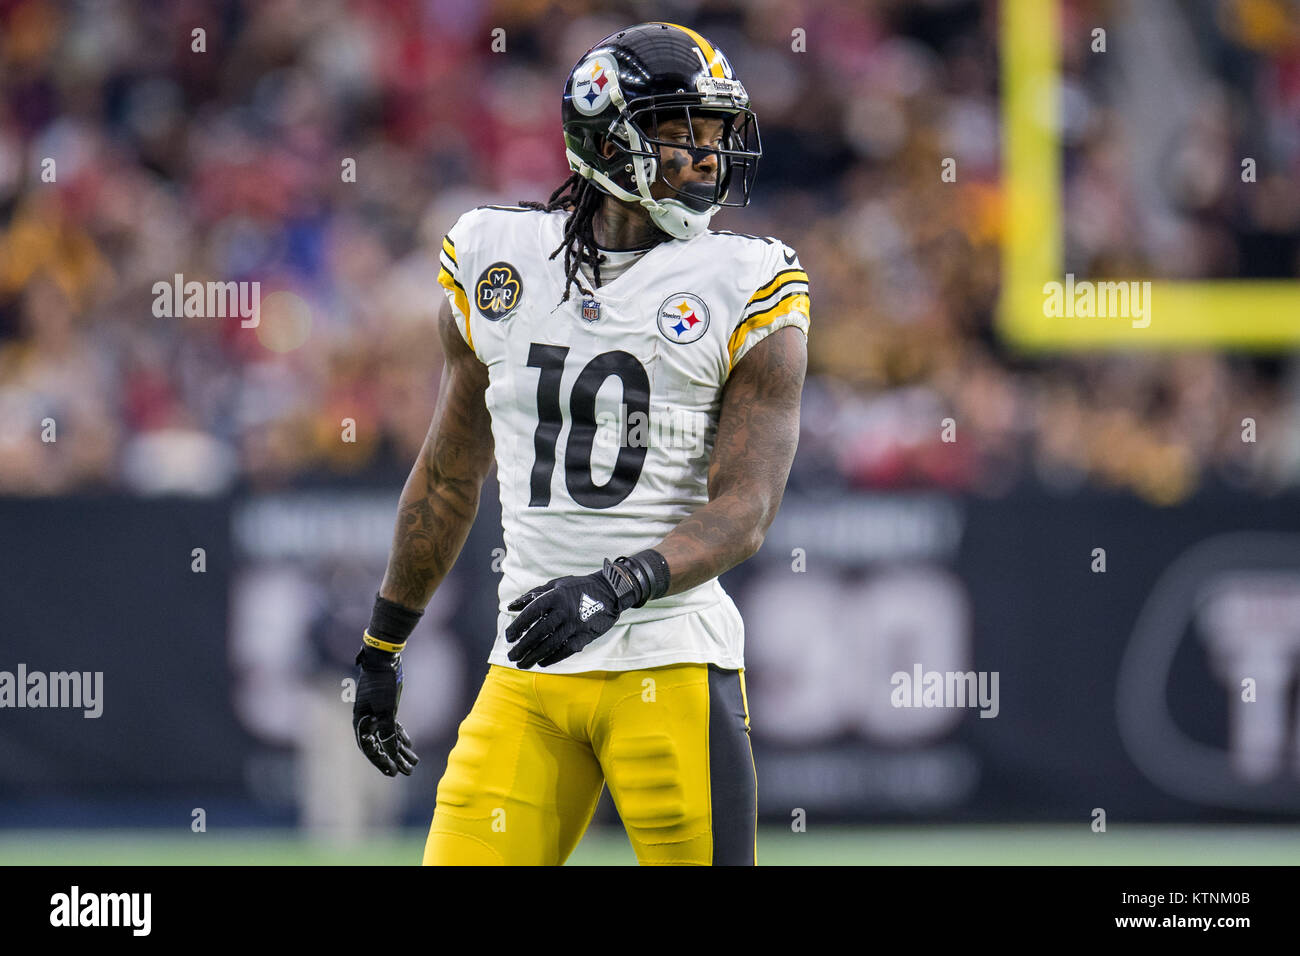 Houston, TX, USA. 25th Dec, 2017. Pittsburgh Steelers wide receiver Martavis Bryant (10) during the 1st quarter of an NFL football game between the Houston Texans and the Pittsburgh Steelers at NRG Stadium in Houston, TX. The Steelers won the game 34 to 6.Trask Smith/CSM/Alamy Live News Stock Photo